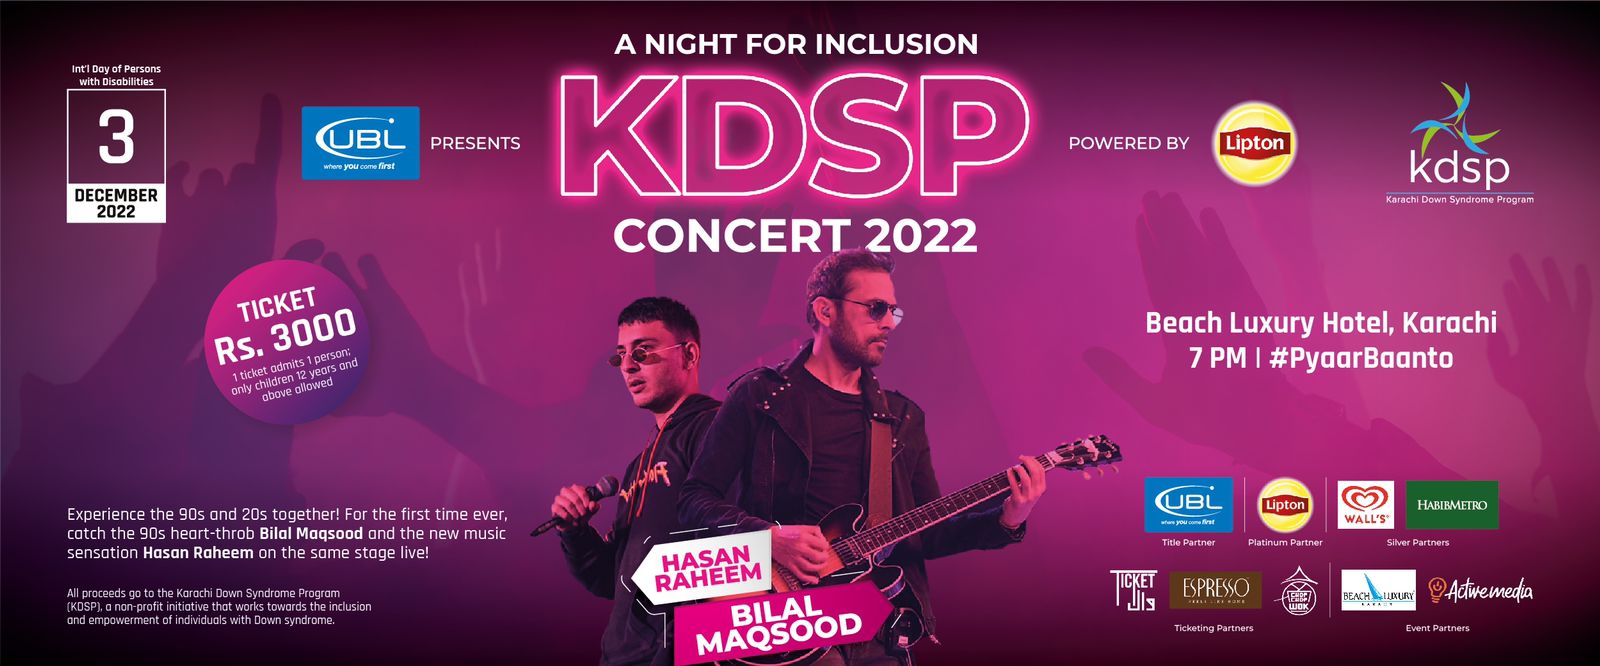 KDSP Concert 2022 - A Night For Inclusion 